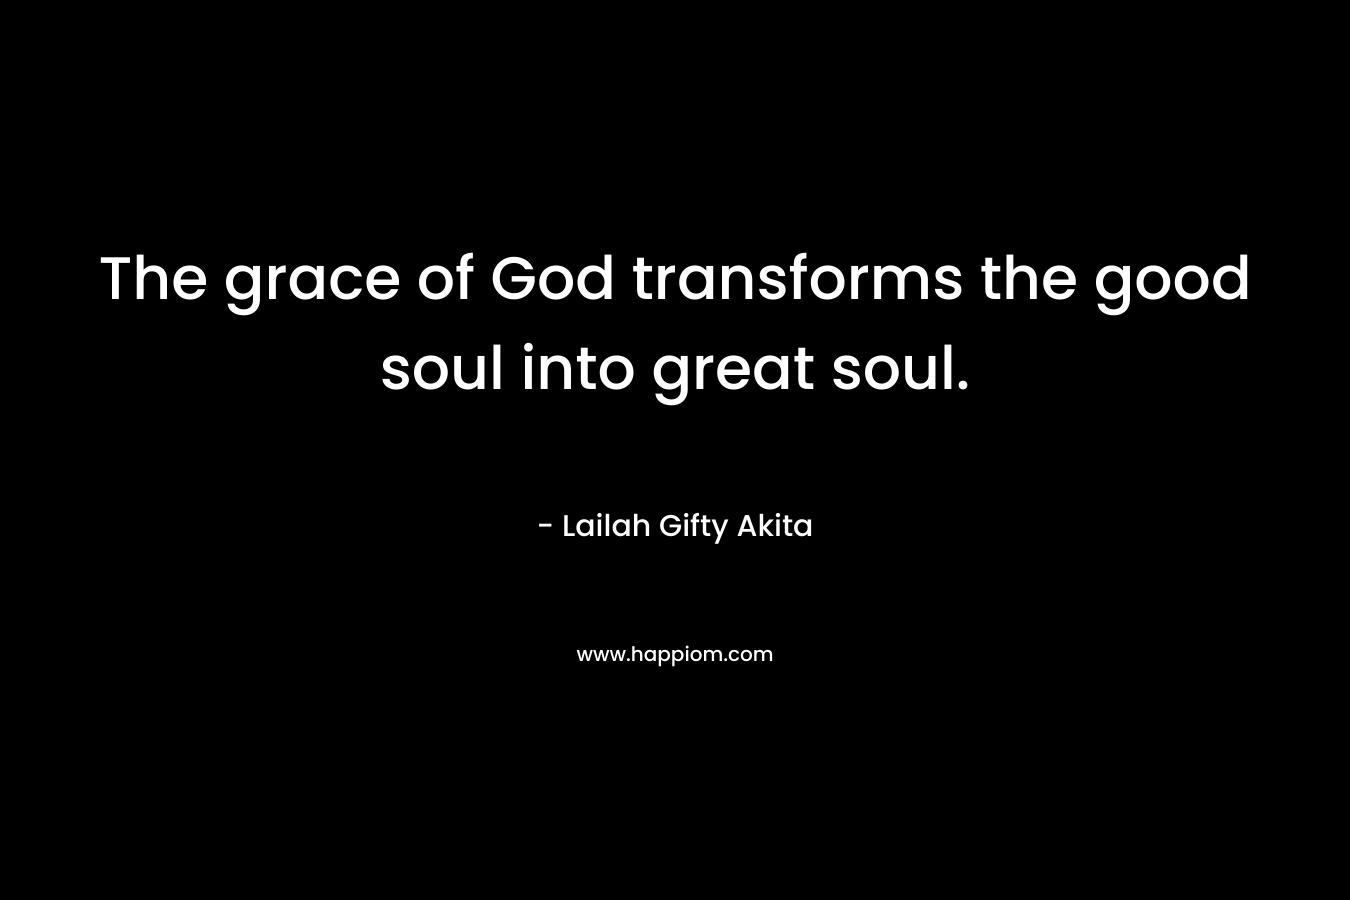 The grace of God transforms the good soul into great soul.